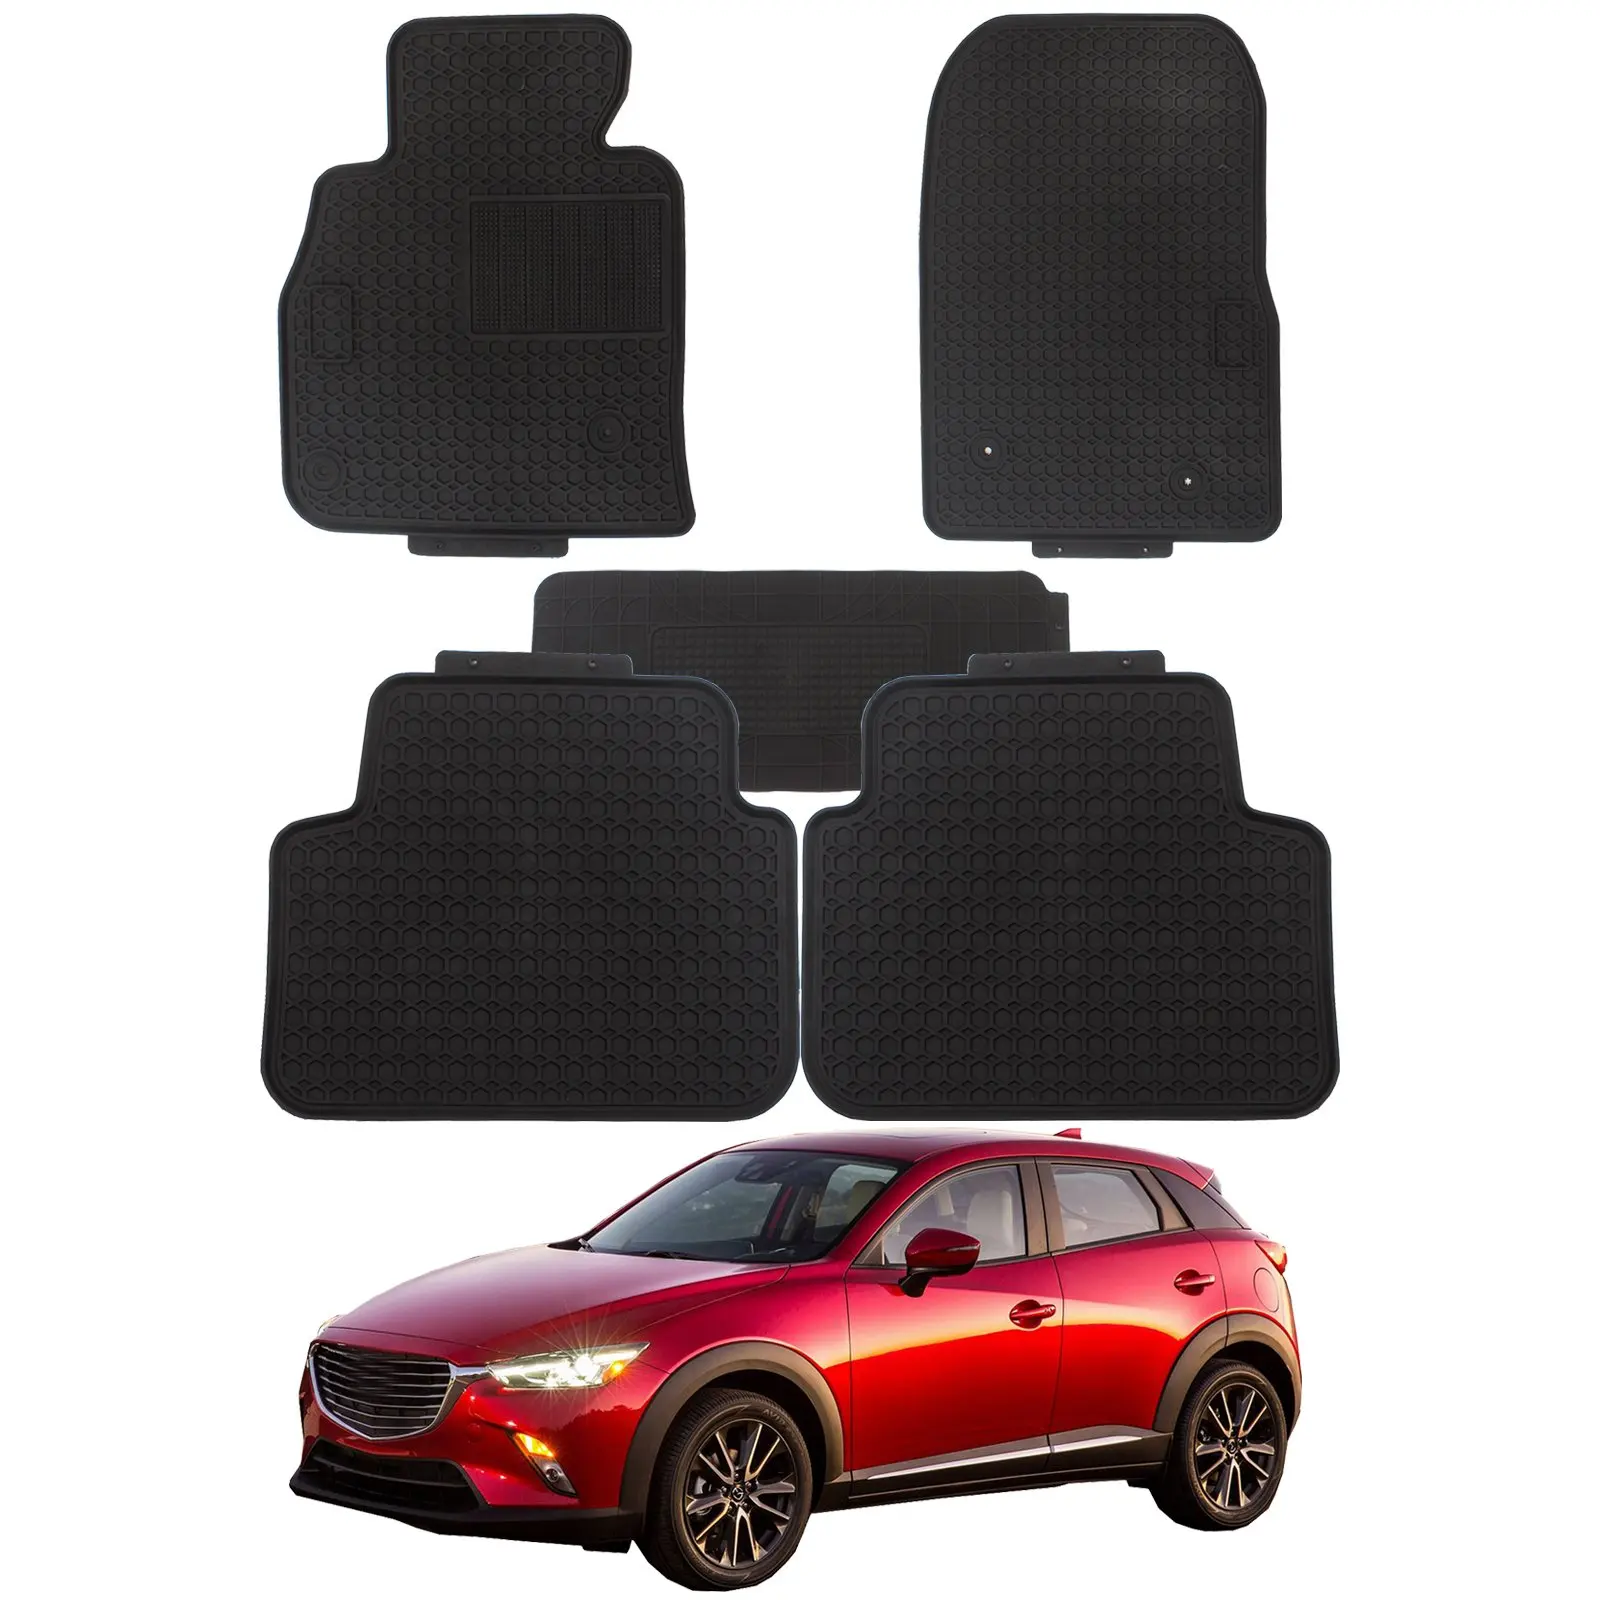 Cheap Mats For Mazda 3 Find Mats For Mazda 3 Deals On Line At